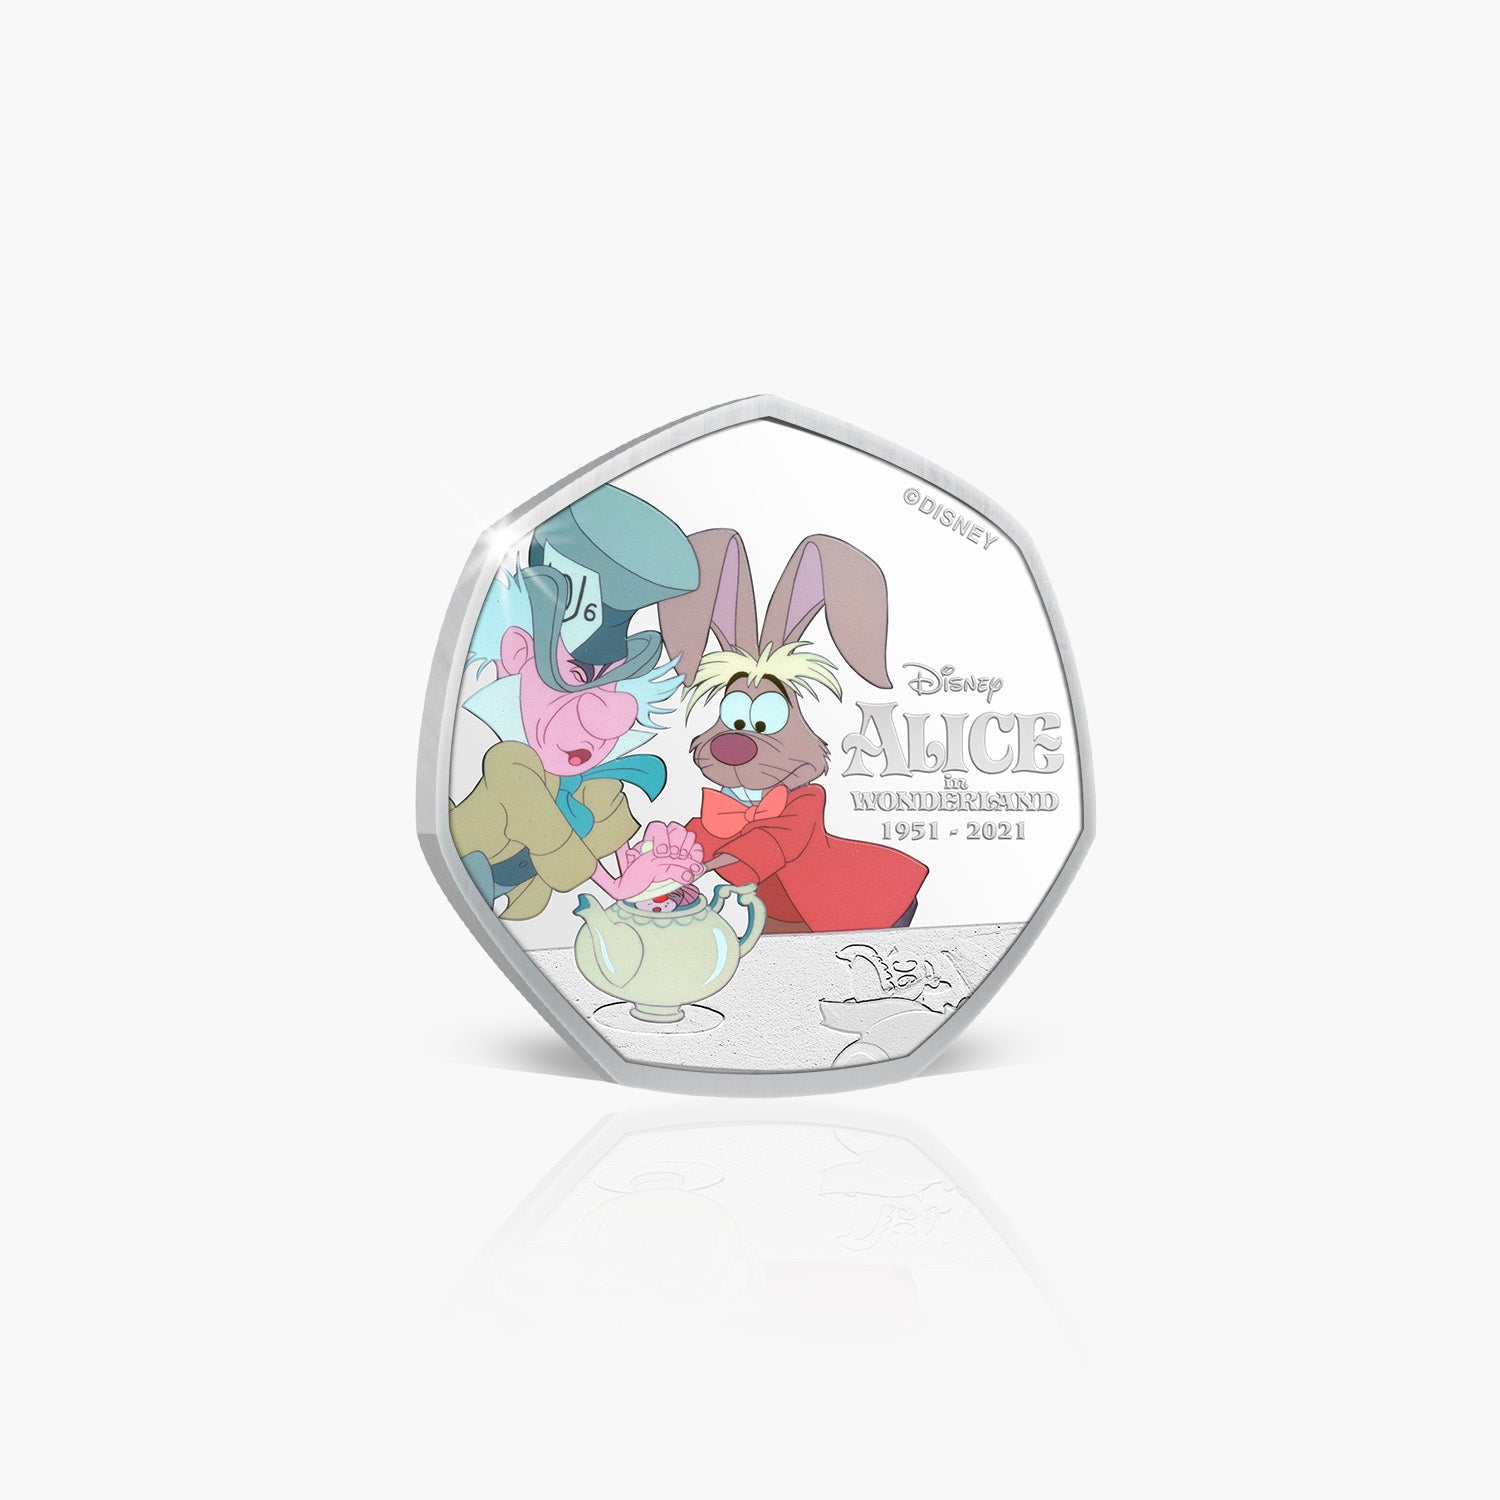 The Tea Party Silver Plated Coin